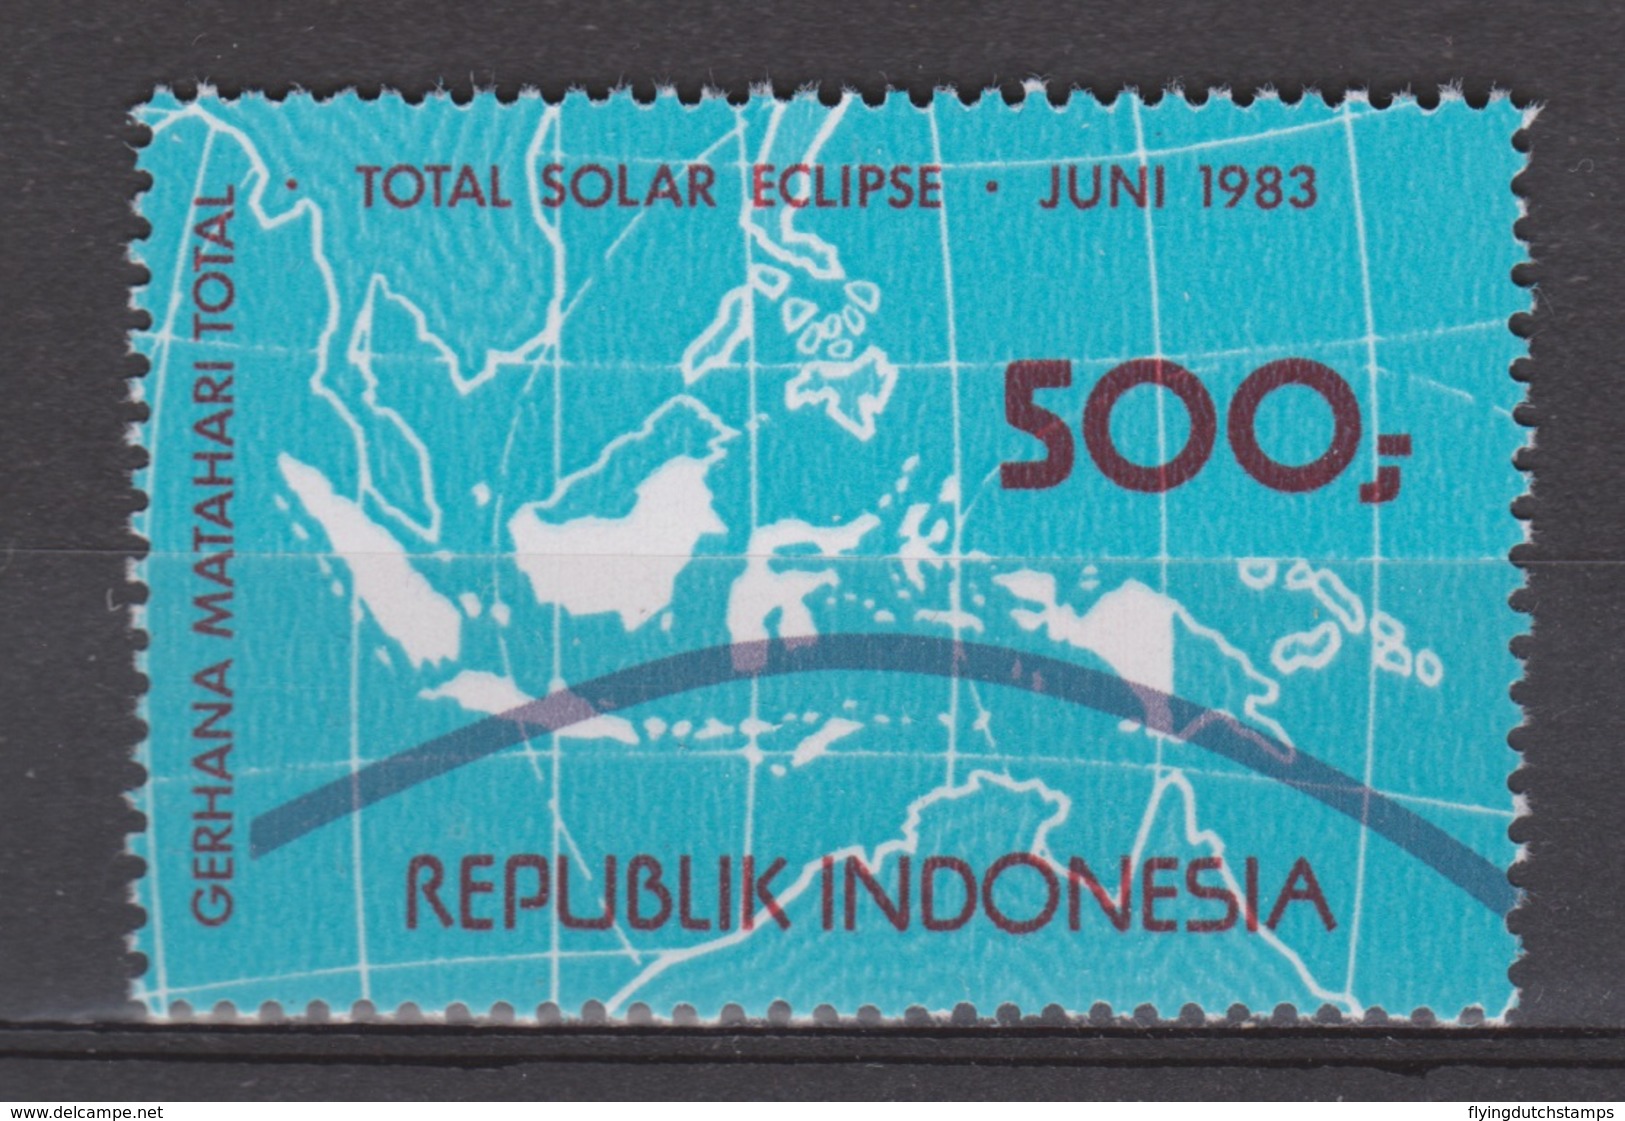 Indonesie 1156 MNH ;  Zonsverduistering, Solar Eclips 1983 MANY CHEAP STAMPS INDONESIA - Astrologie